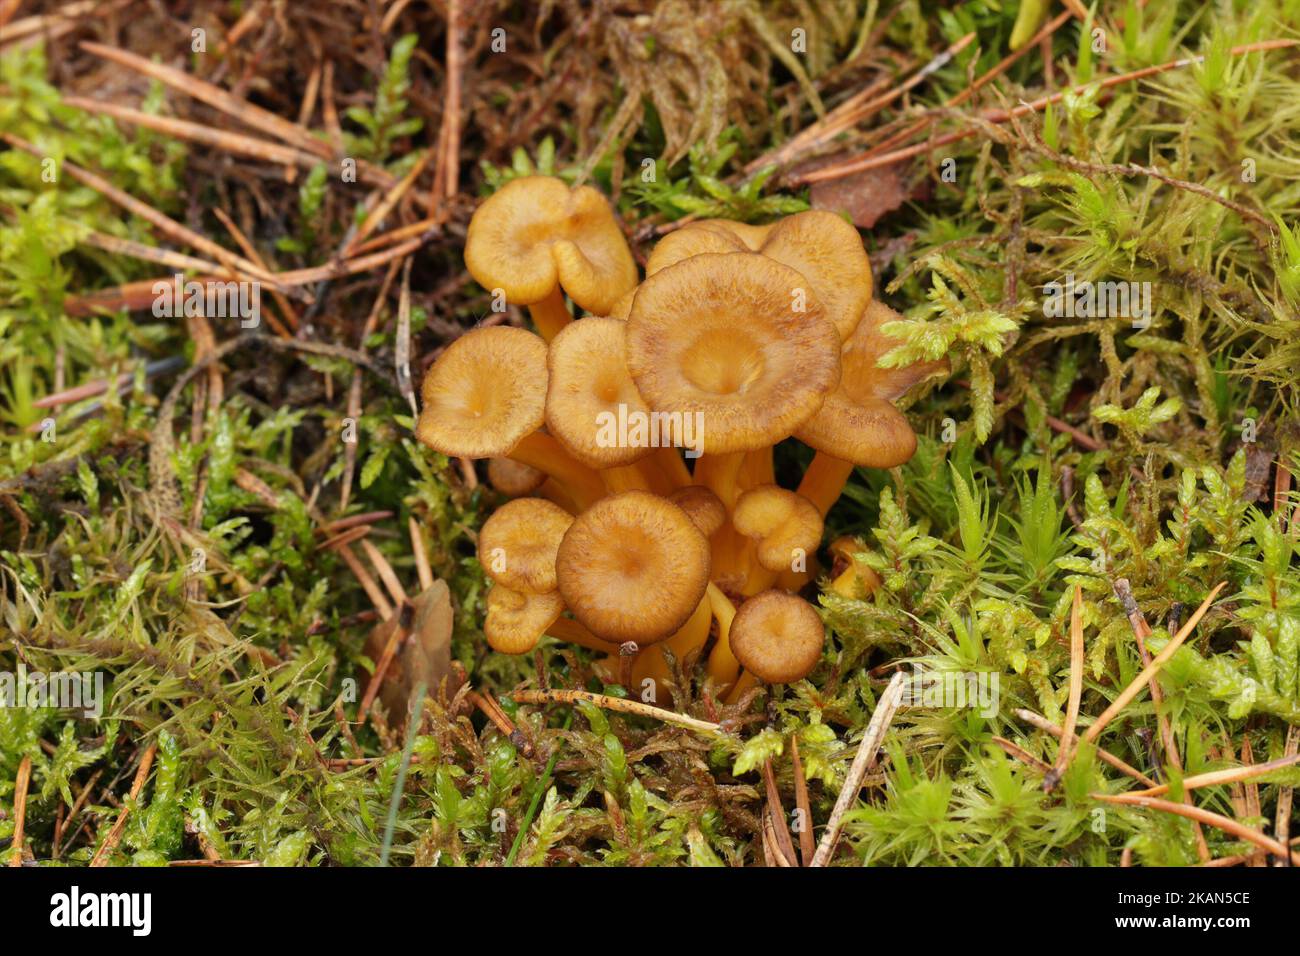 A bunch of wild edible funnel chanterelle mushrooms grows in the forest. Brown caps with decurrent pale gills and yellow hollow stalks. Yellowfoot. Stock Photo